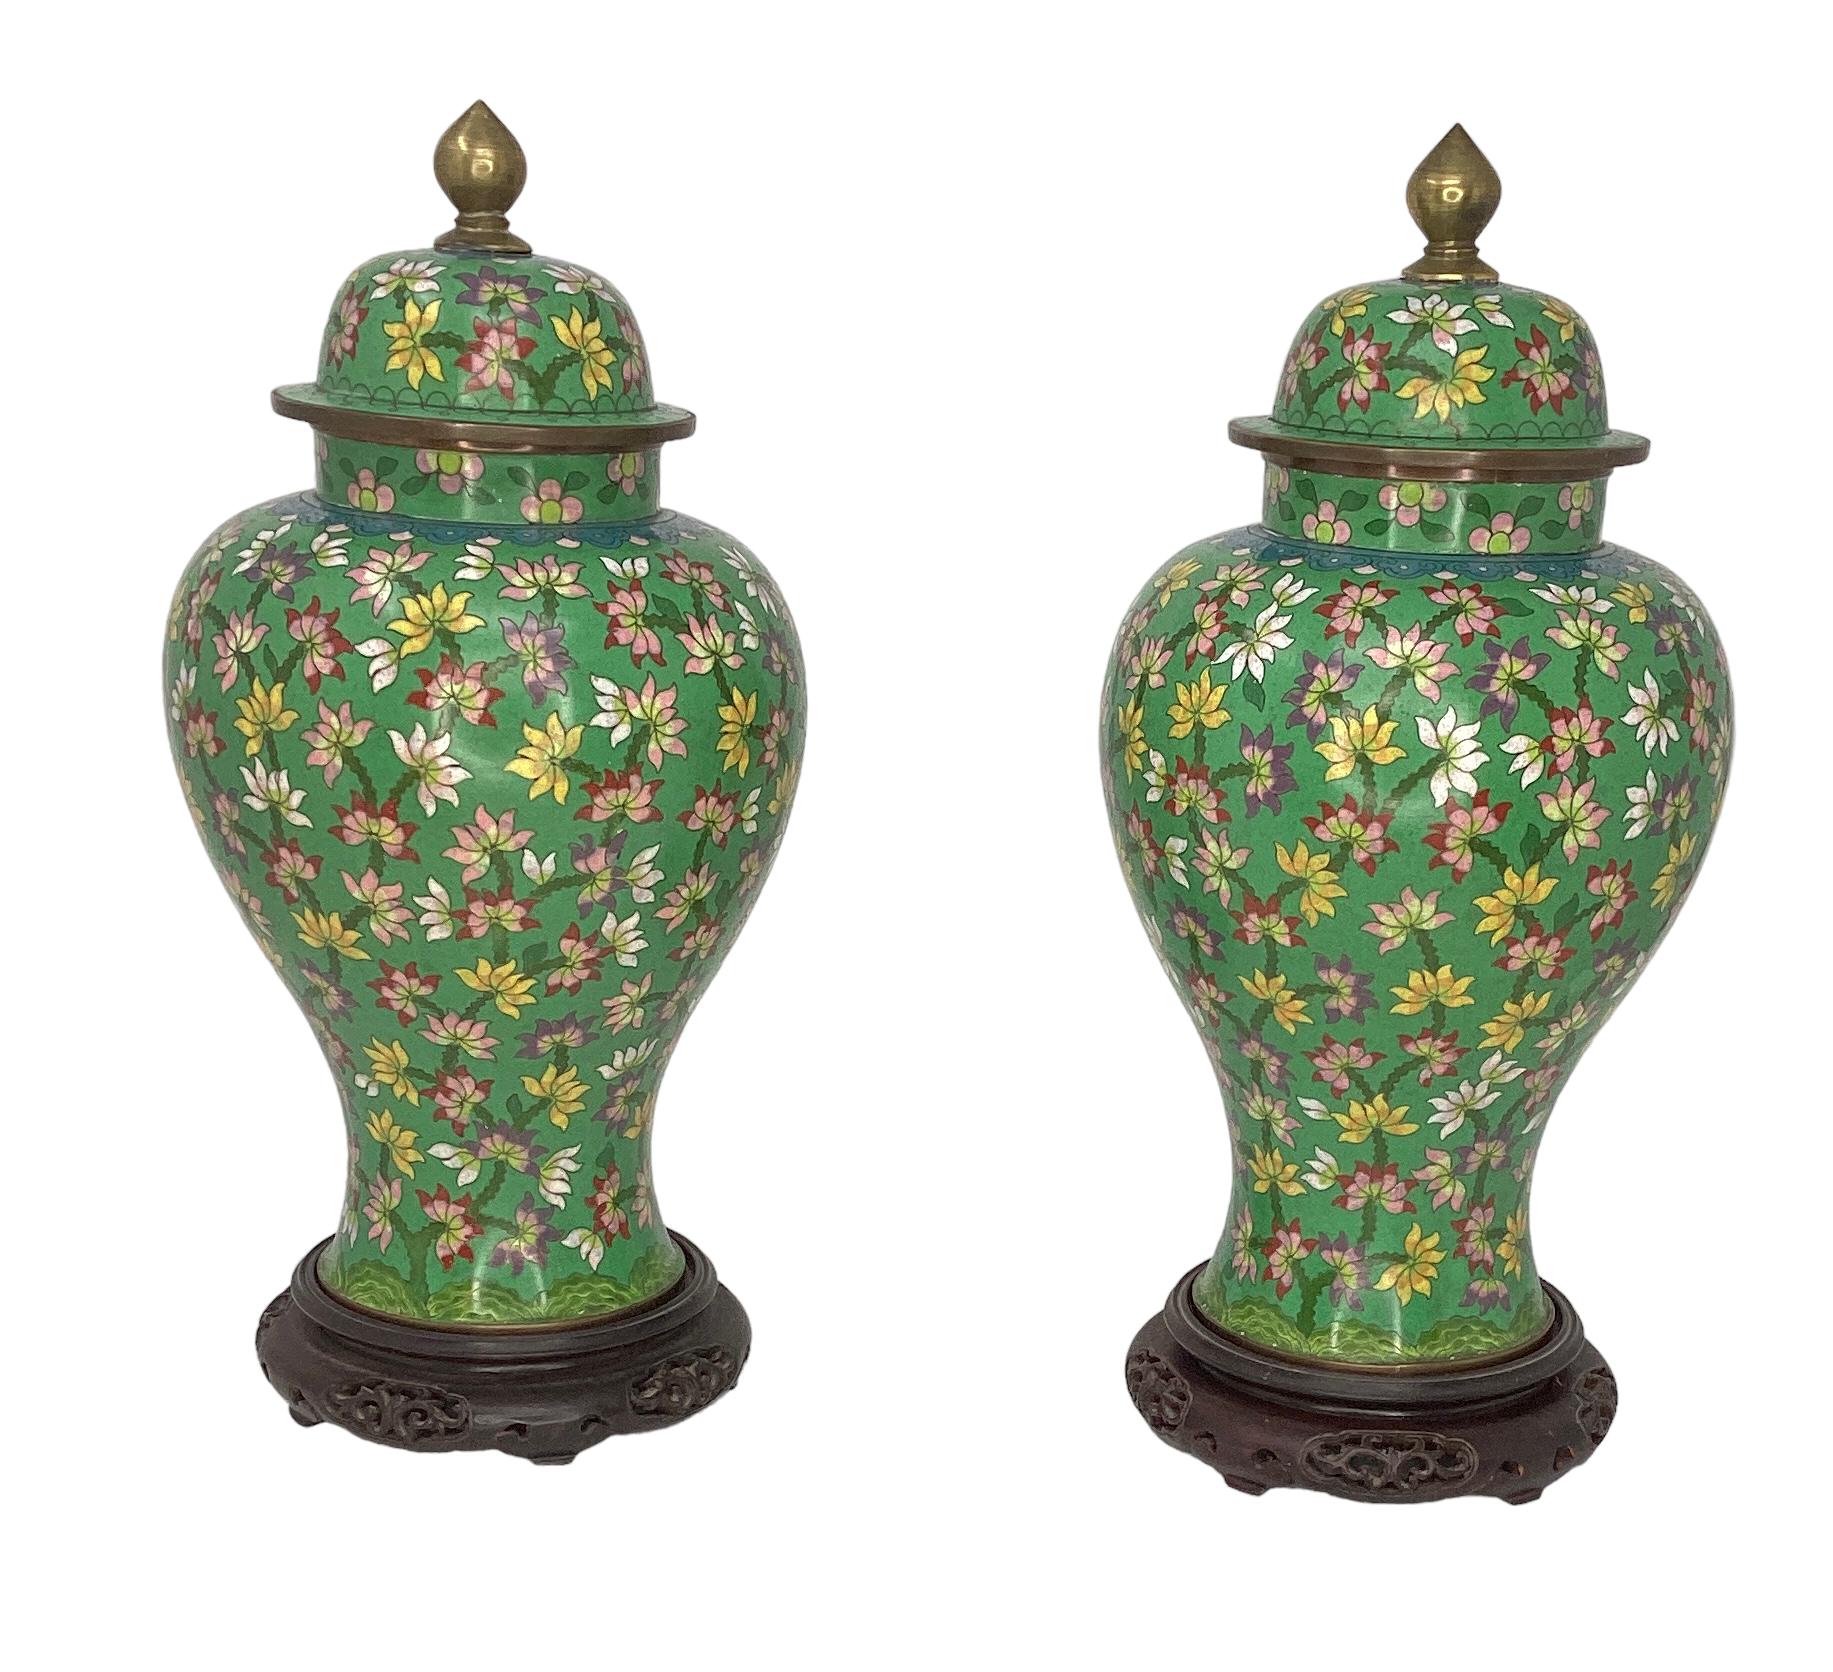 Early 20th Century Pair of Antique Chinese Cloisonné Covered Ginger Jar Vases